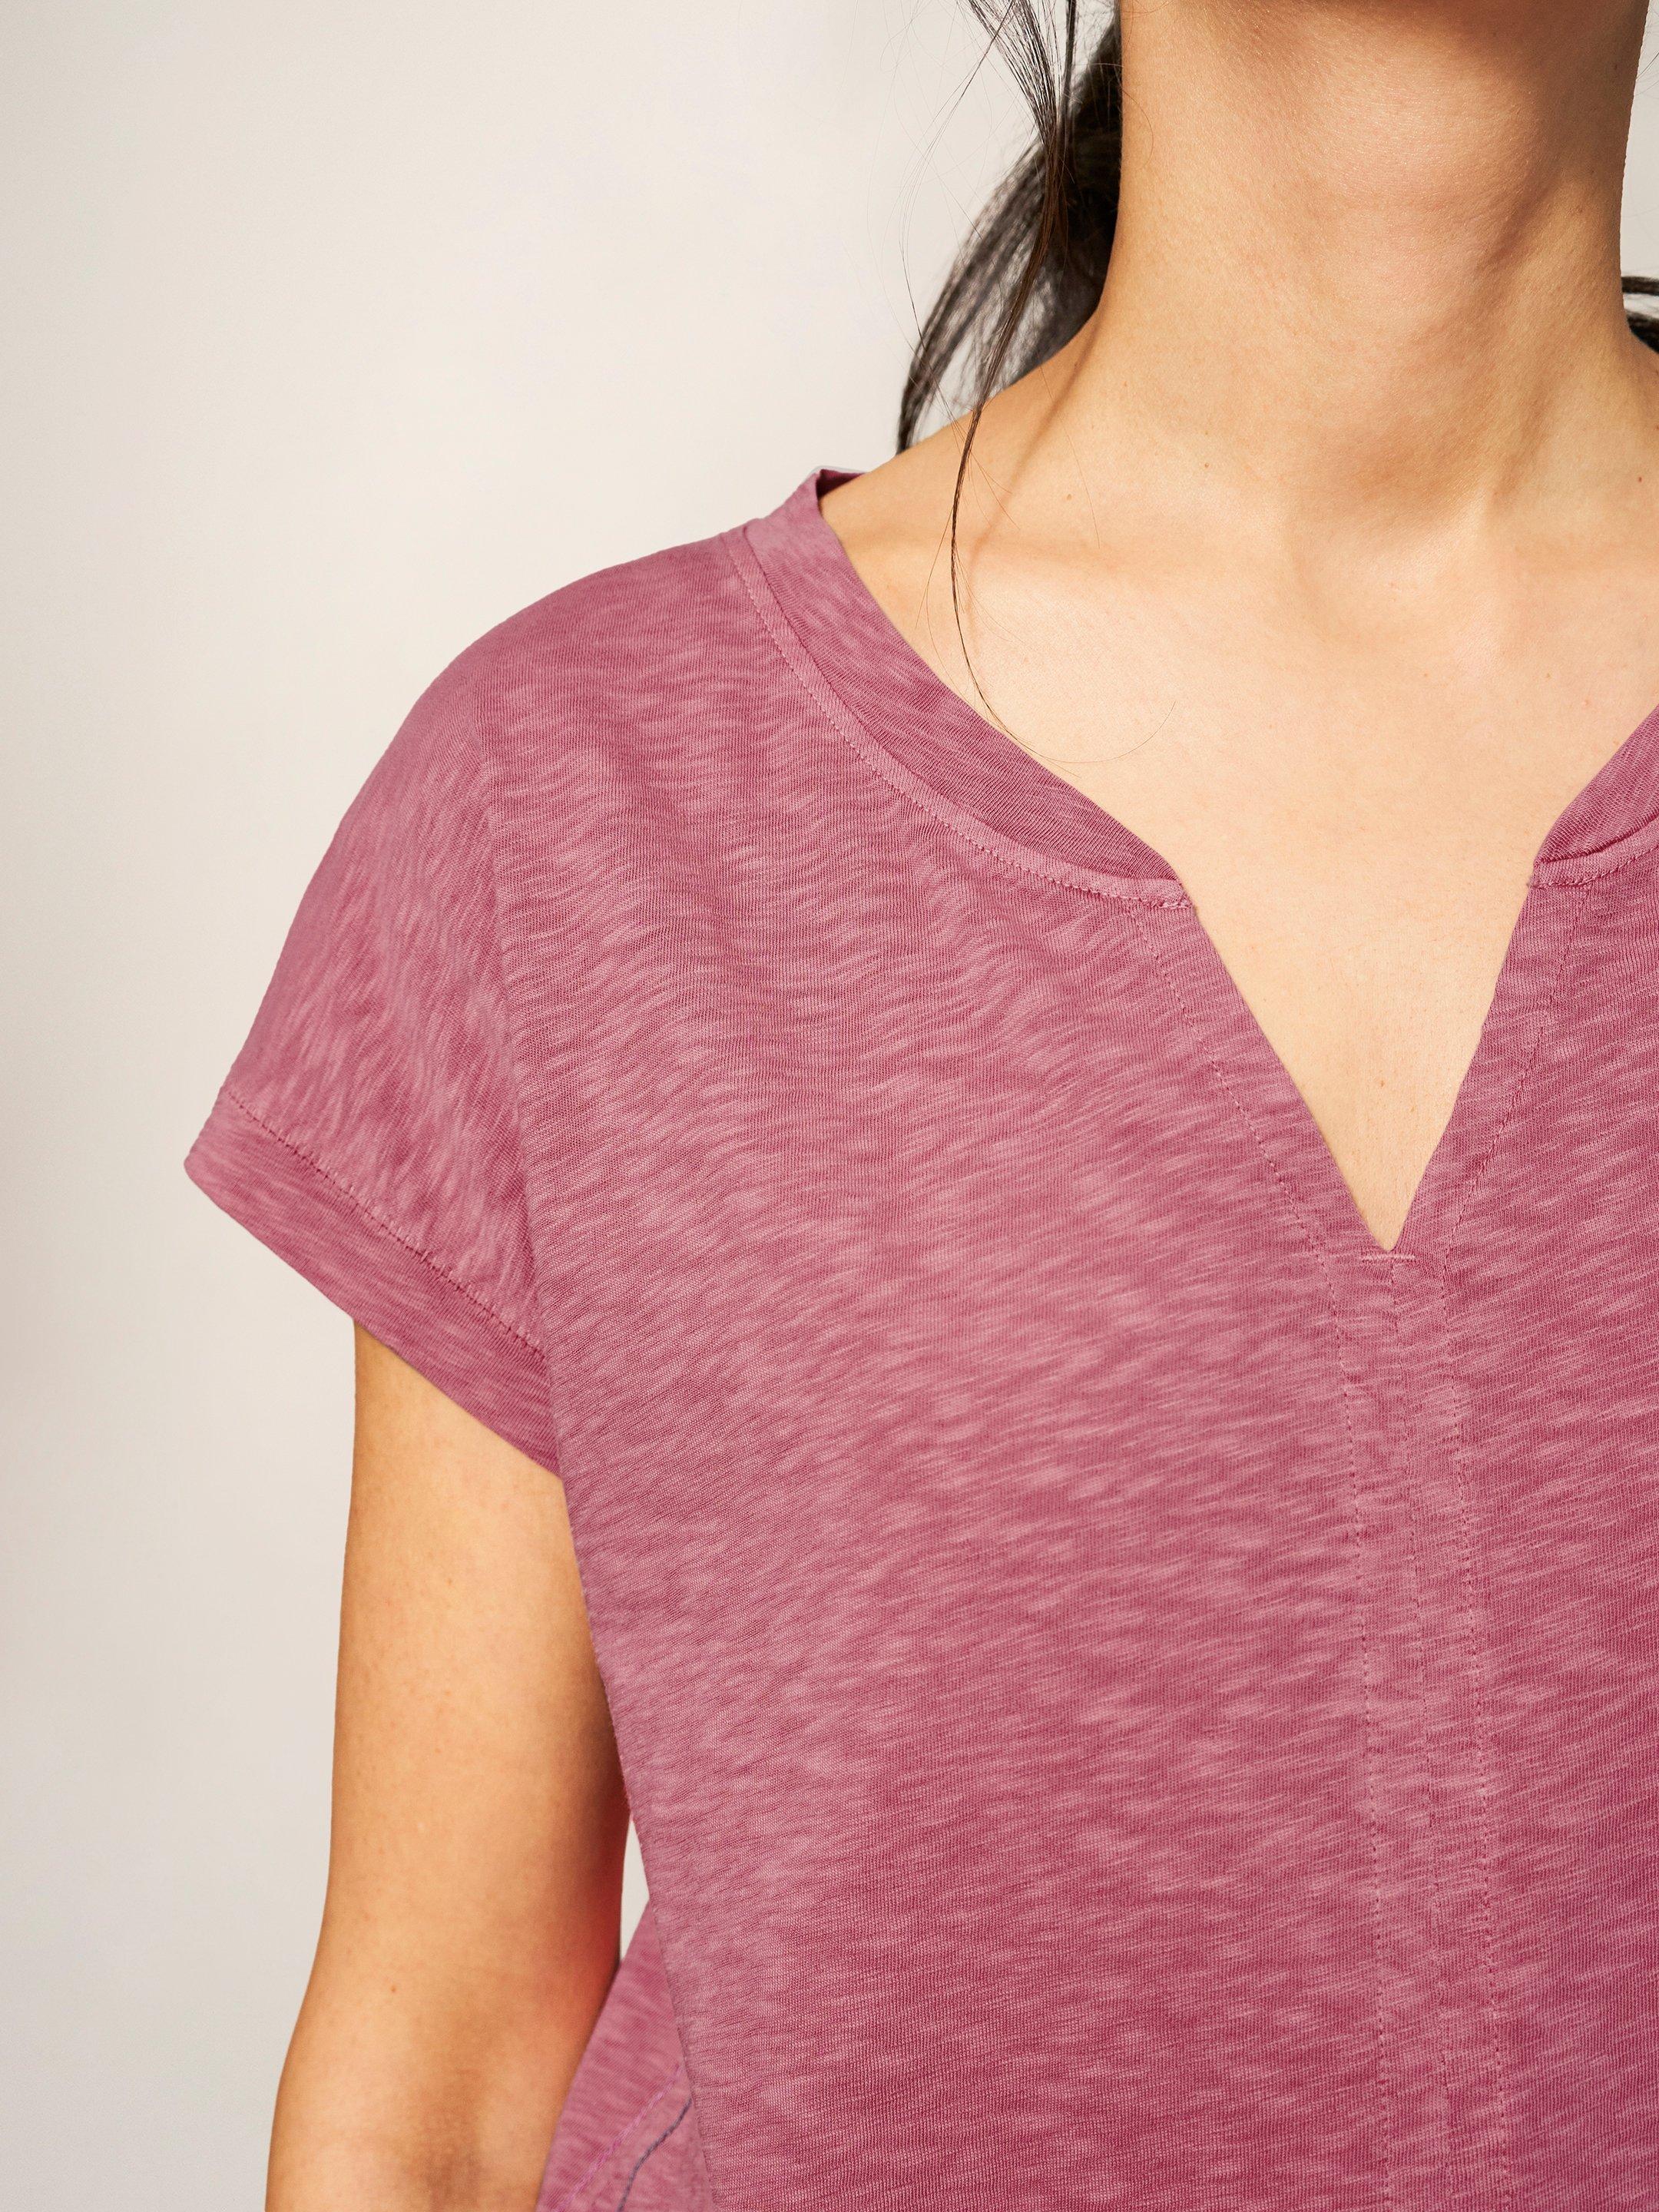 NELLY TEE in DUS PINK - MODEL DETAIL